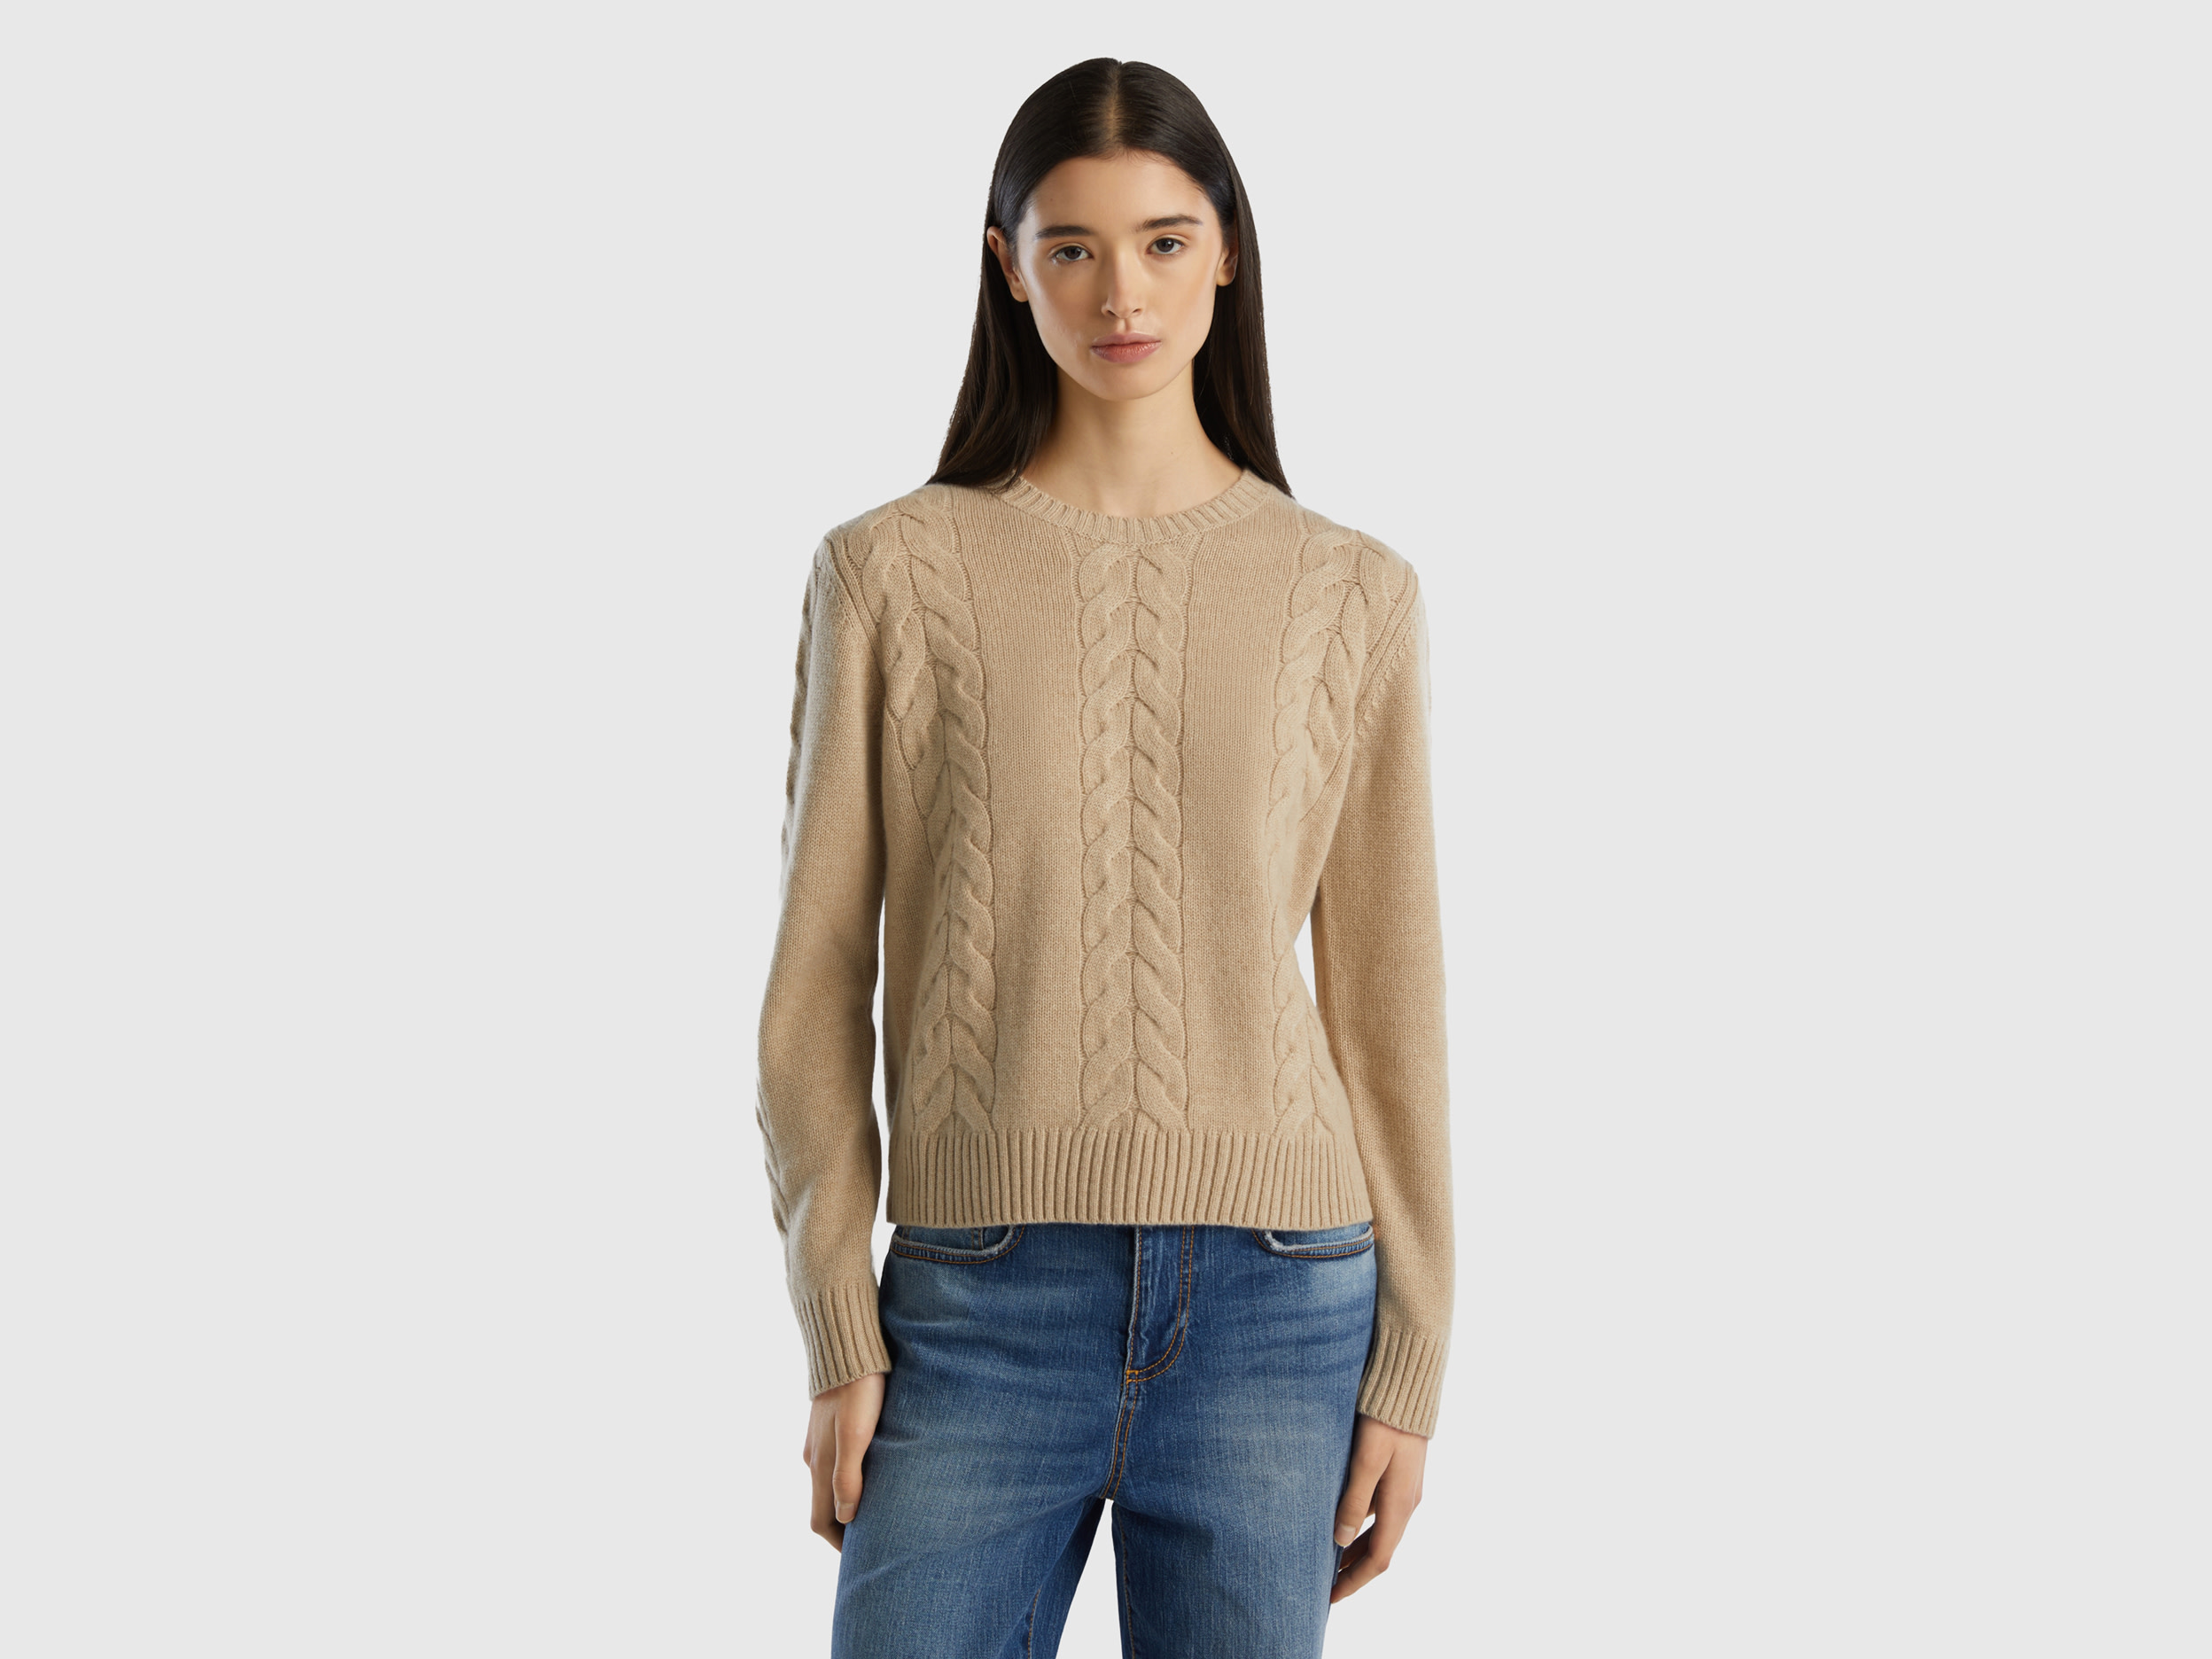 Benetton, Cable Knit Sweater In Pure Cashmere, size M, Beige, Women